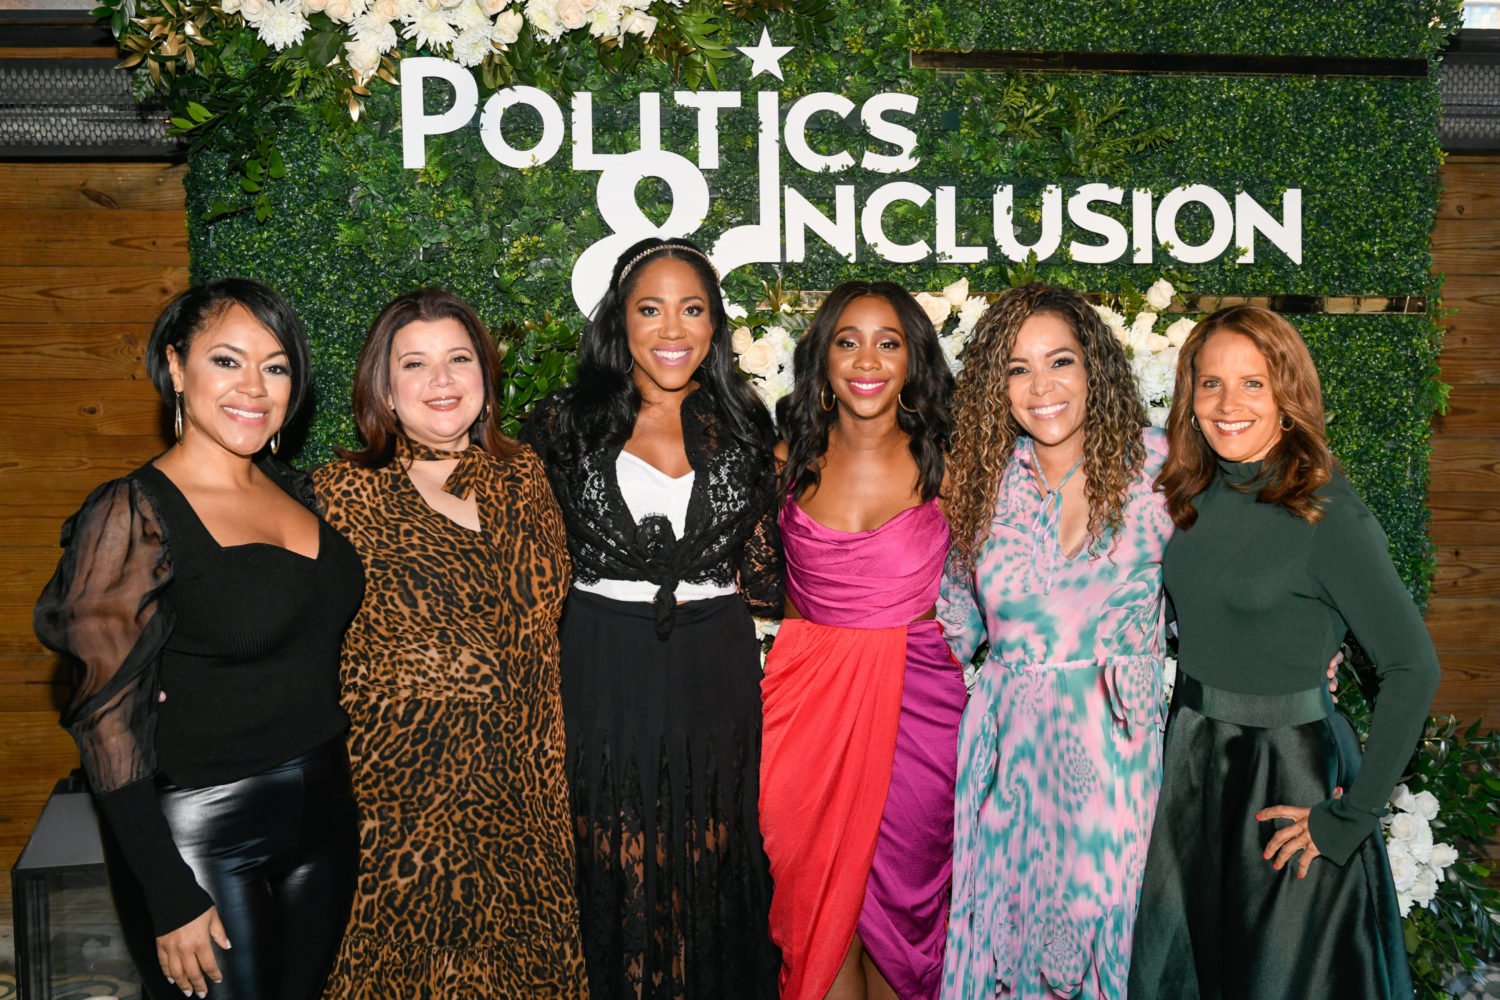 Politics & Inclusion Kicked Off White House Correspondents’ Weekend With This Media Powerhouse Lineup To Celebrate Diversity